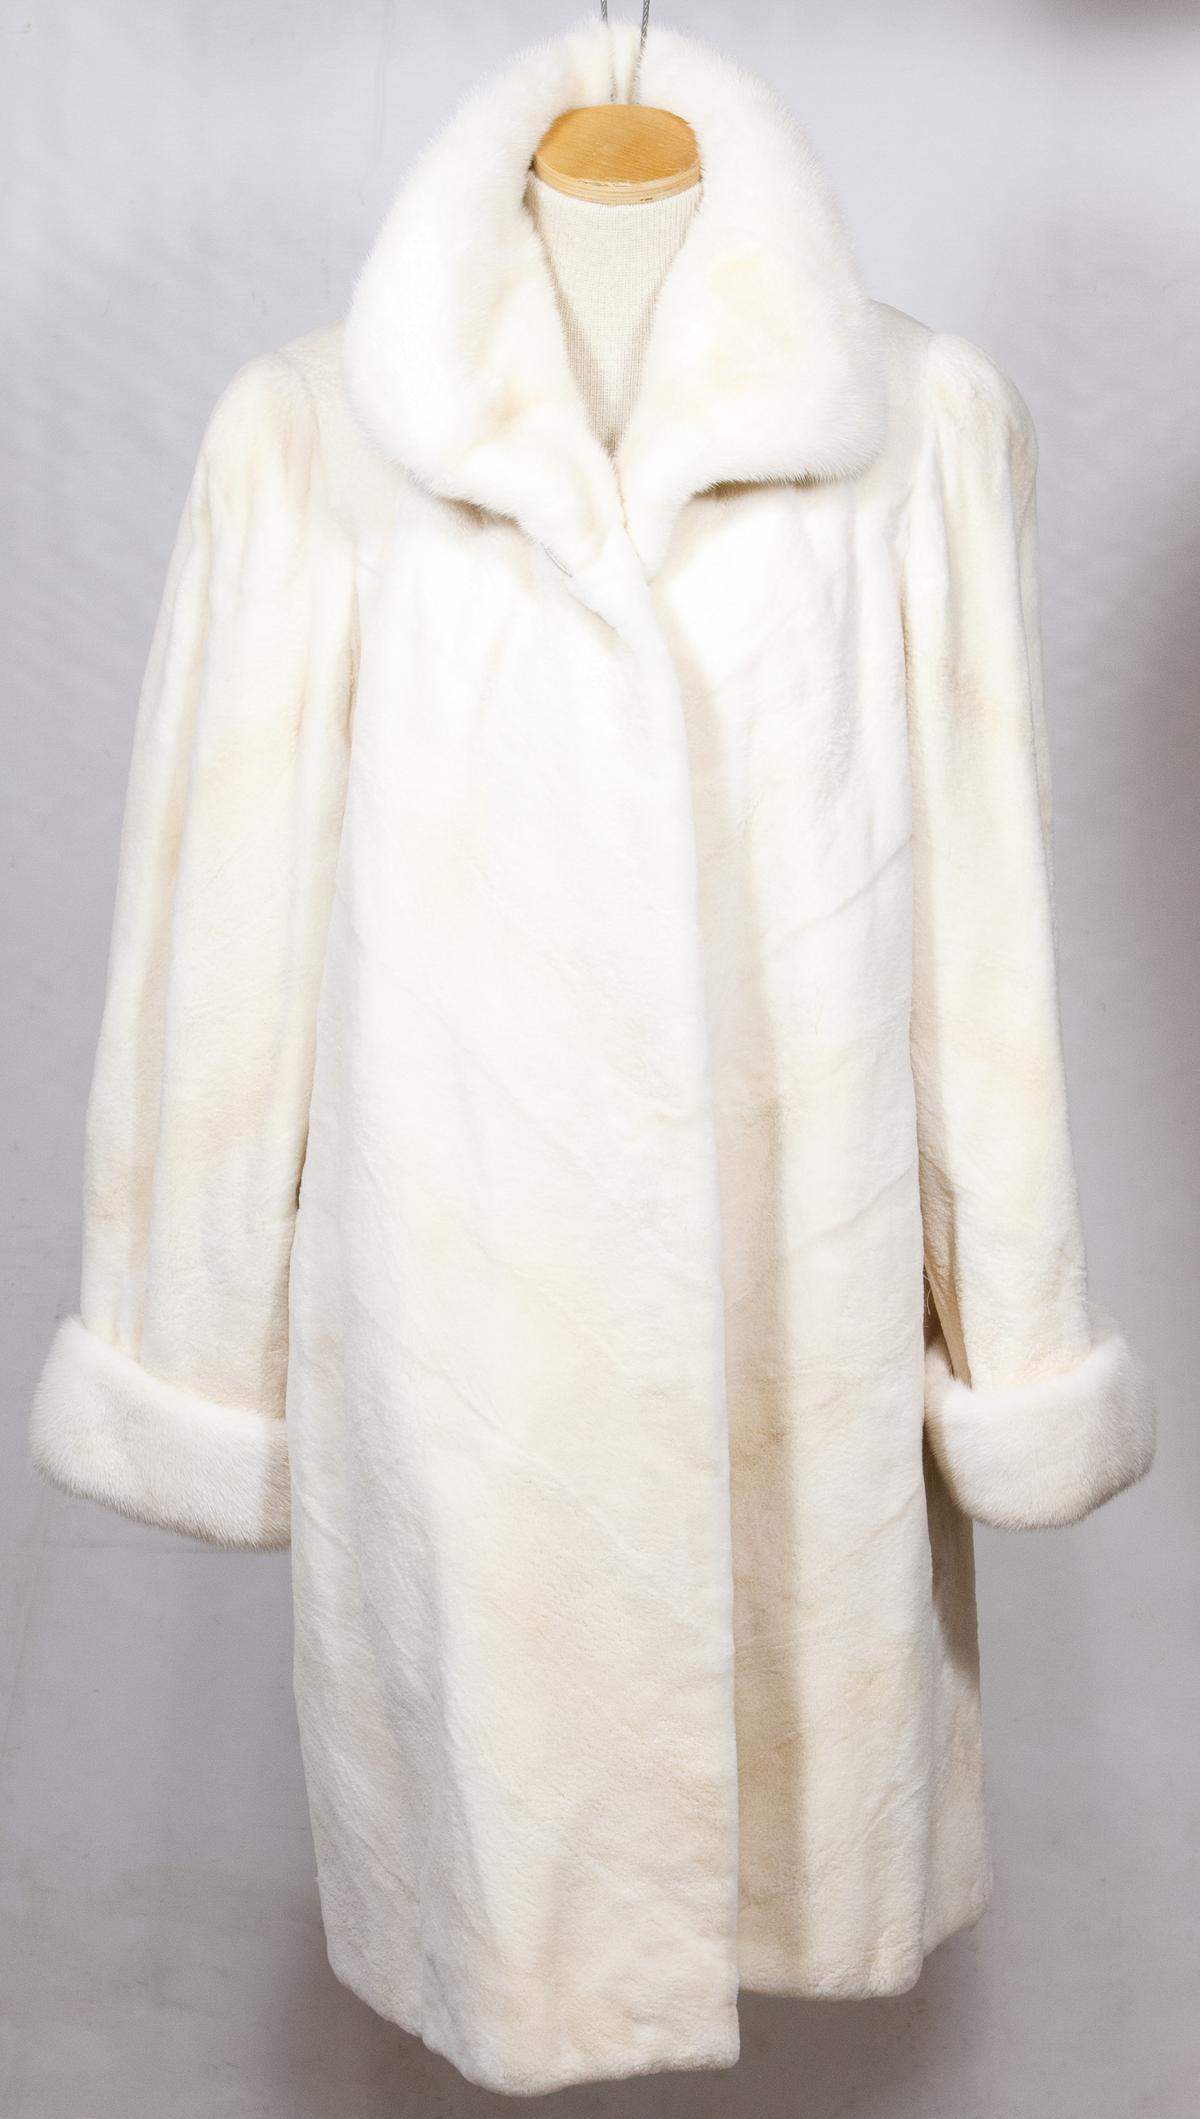 White Fur Coat with Mink Collar and Cuffs by Lagerfeld